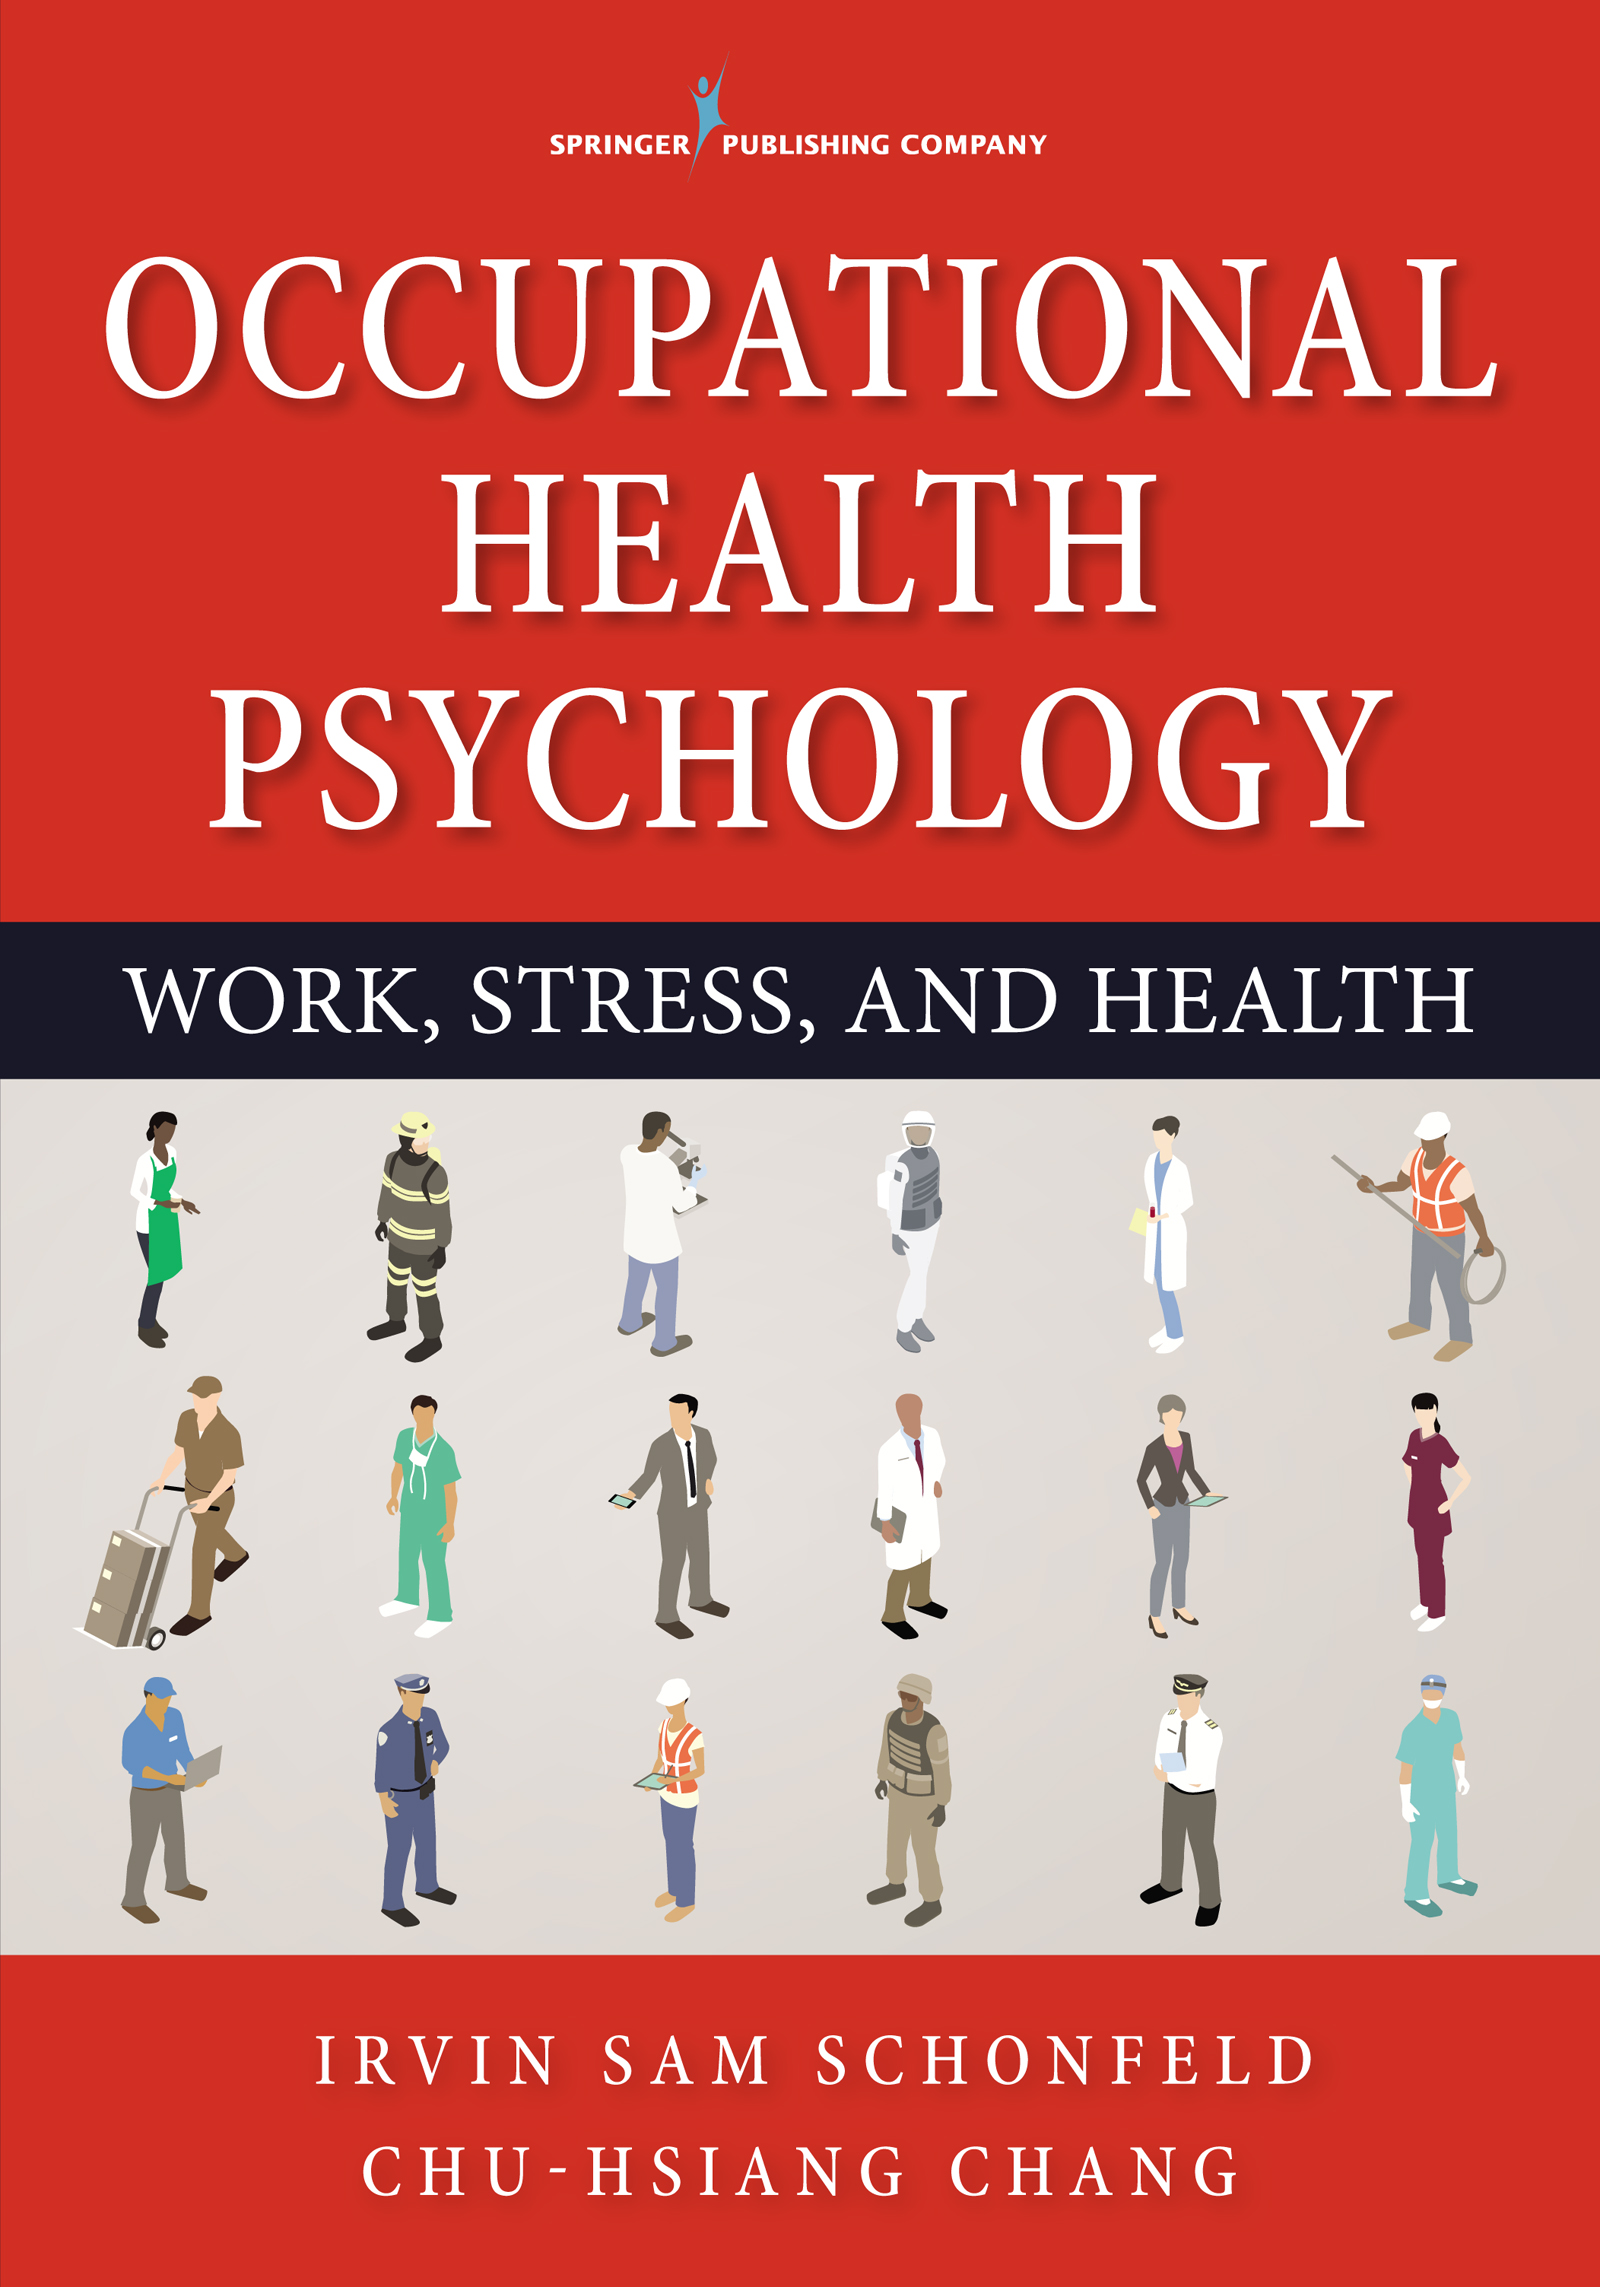 Health psychology. Occupational Psychology. Occupational diseases textbook. Springer books of Psychology. Occupational diseases textbook for Medical students.